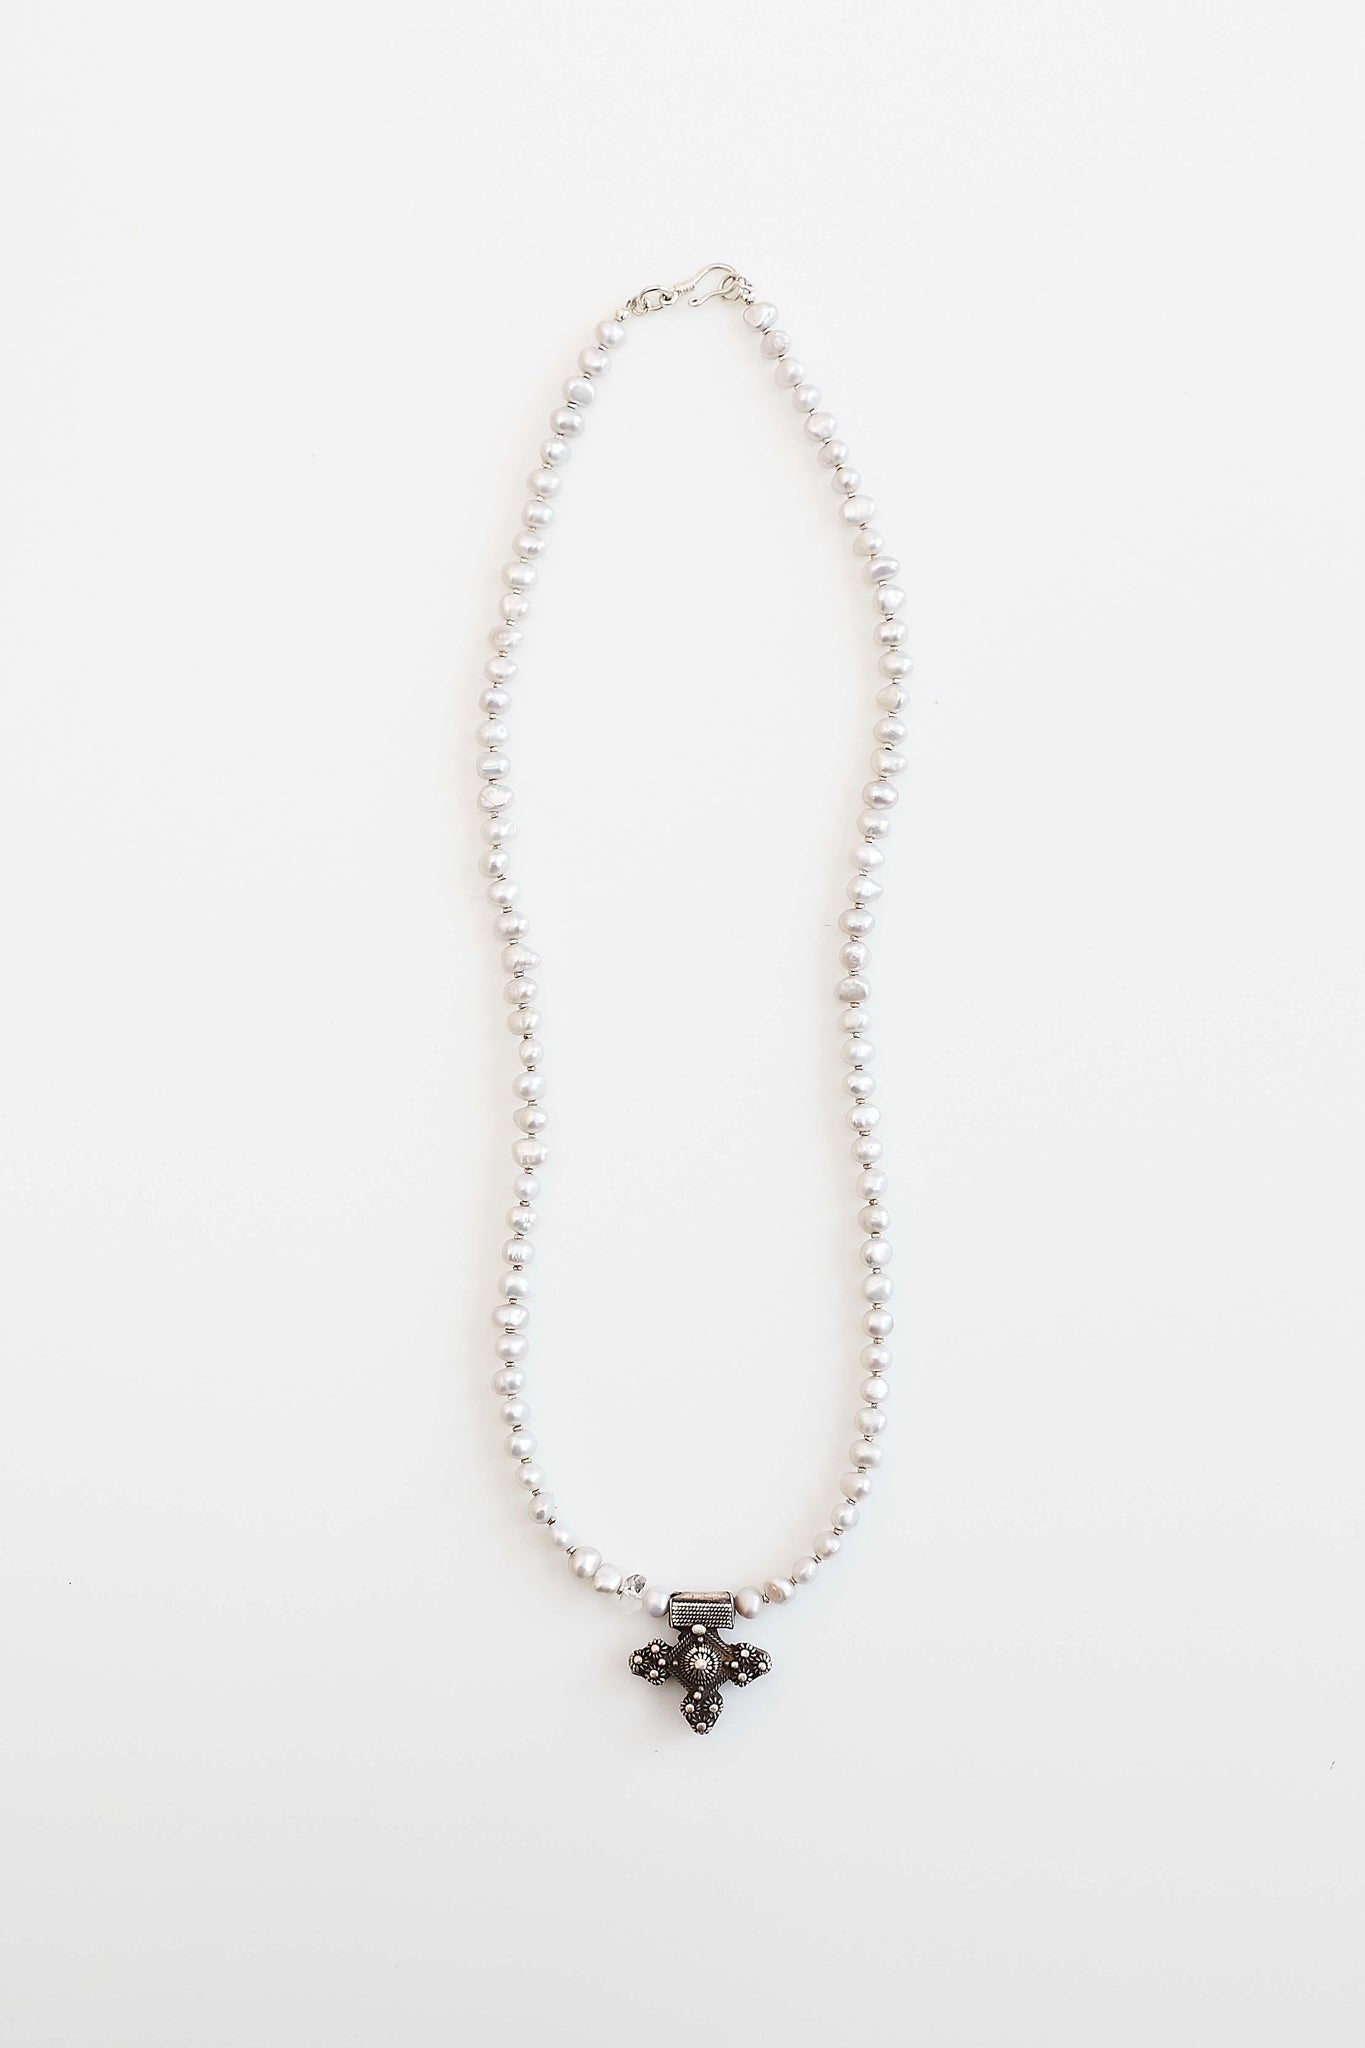 Elizabeth Pearl and Antique Cross Necklace